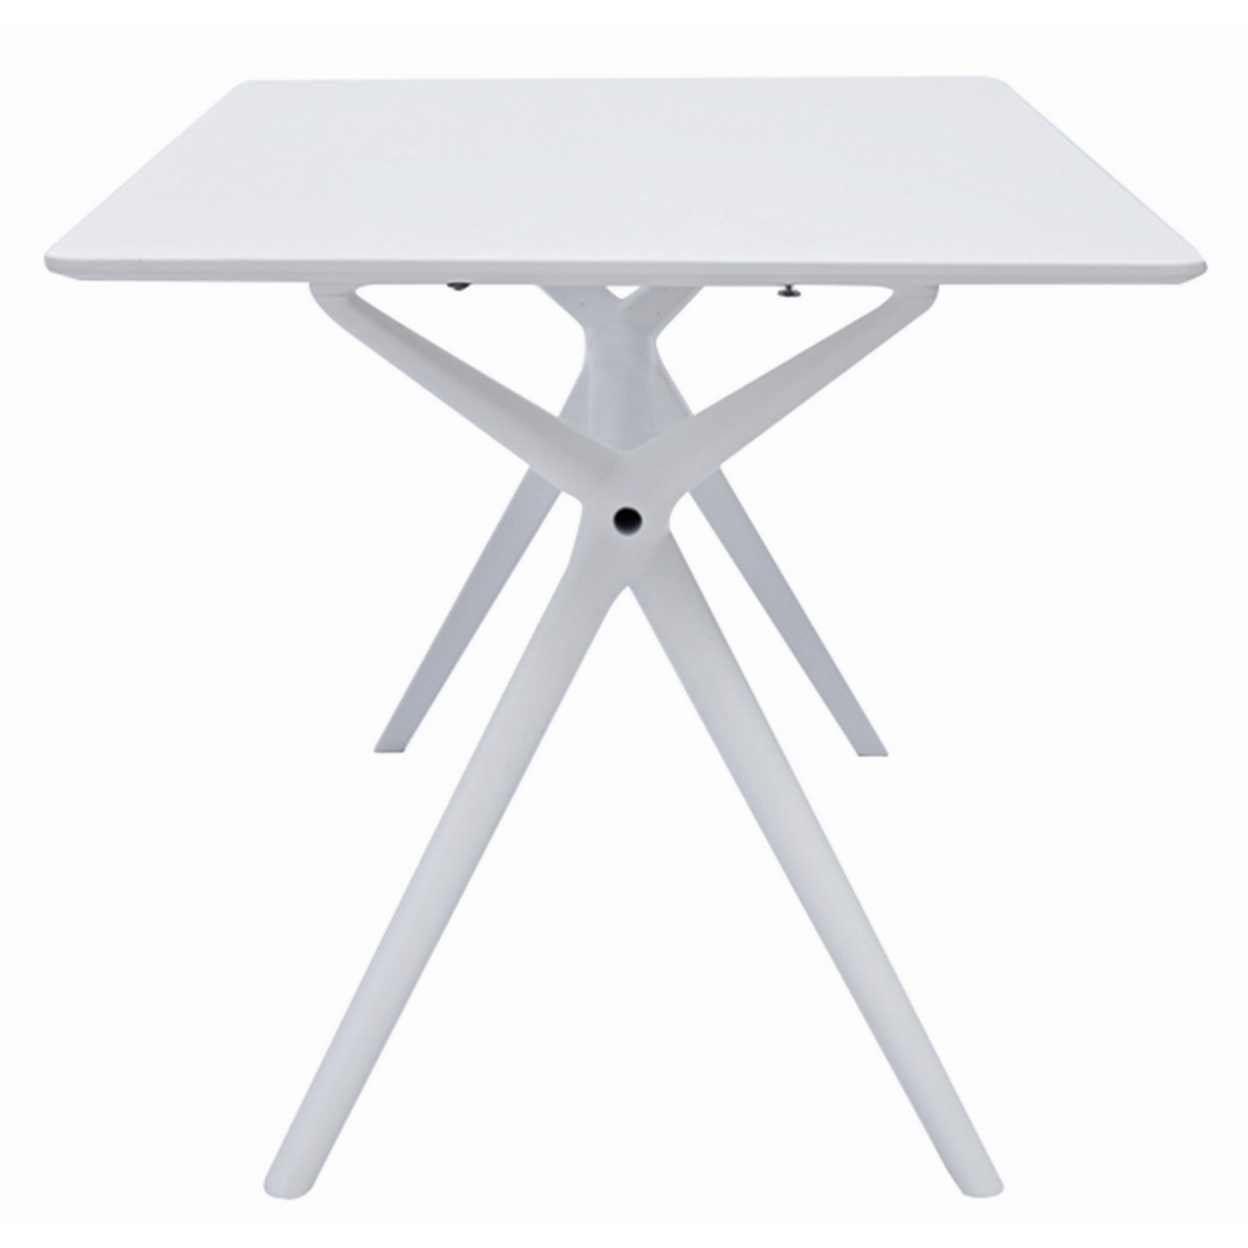 47 Inch Modern Outdoor Coffee Table, Midcentury Design, White Frame And Top, Saltoro Sherpi